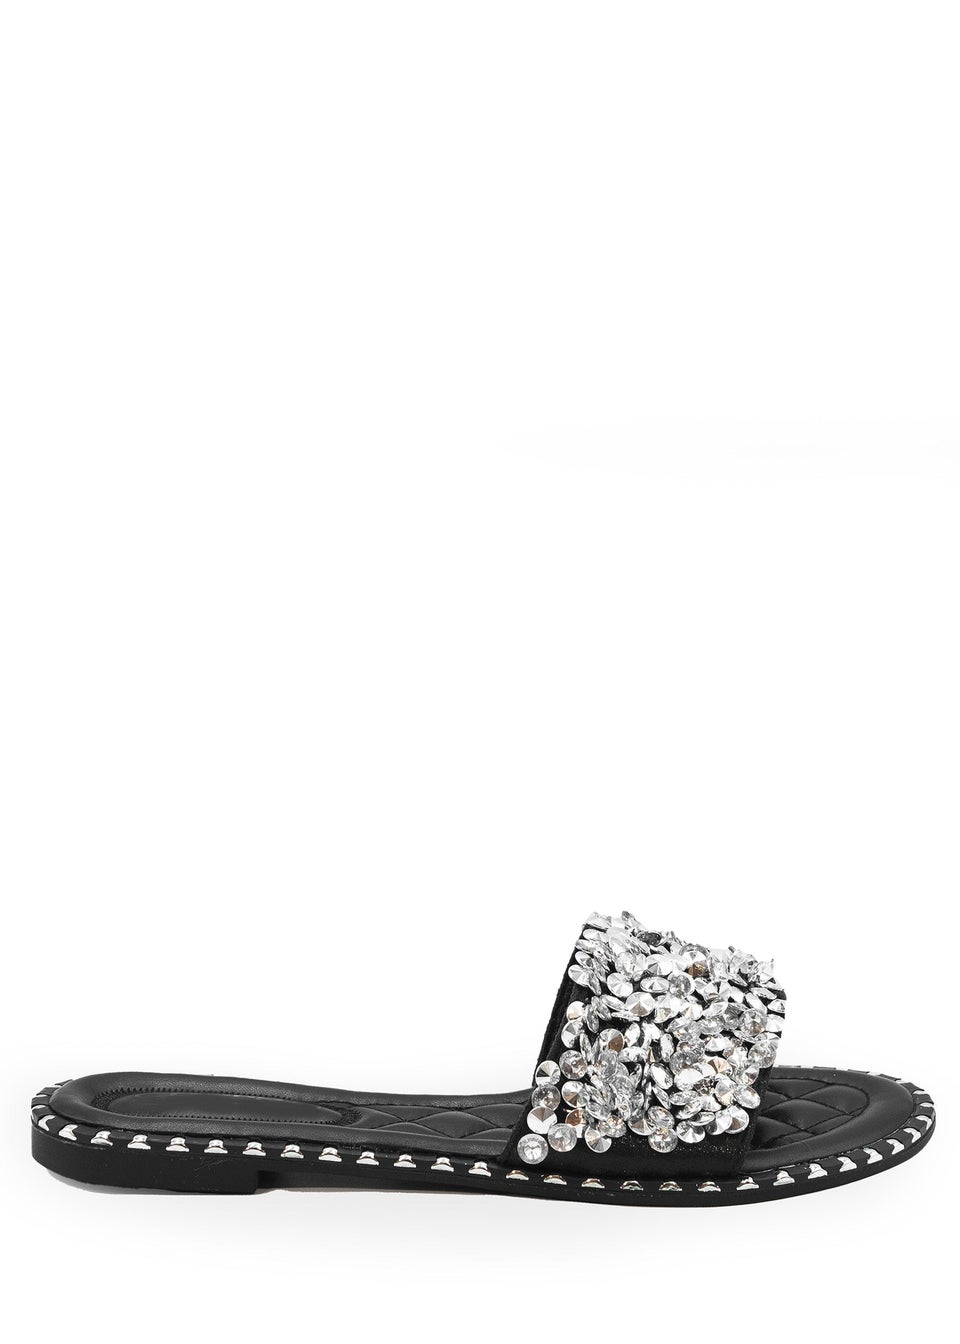 Where's That From Black Belle Diamante Sparkly Flat Sliders